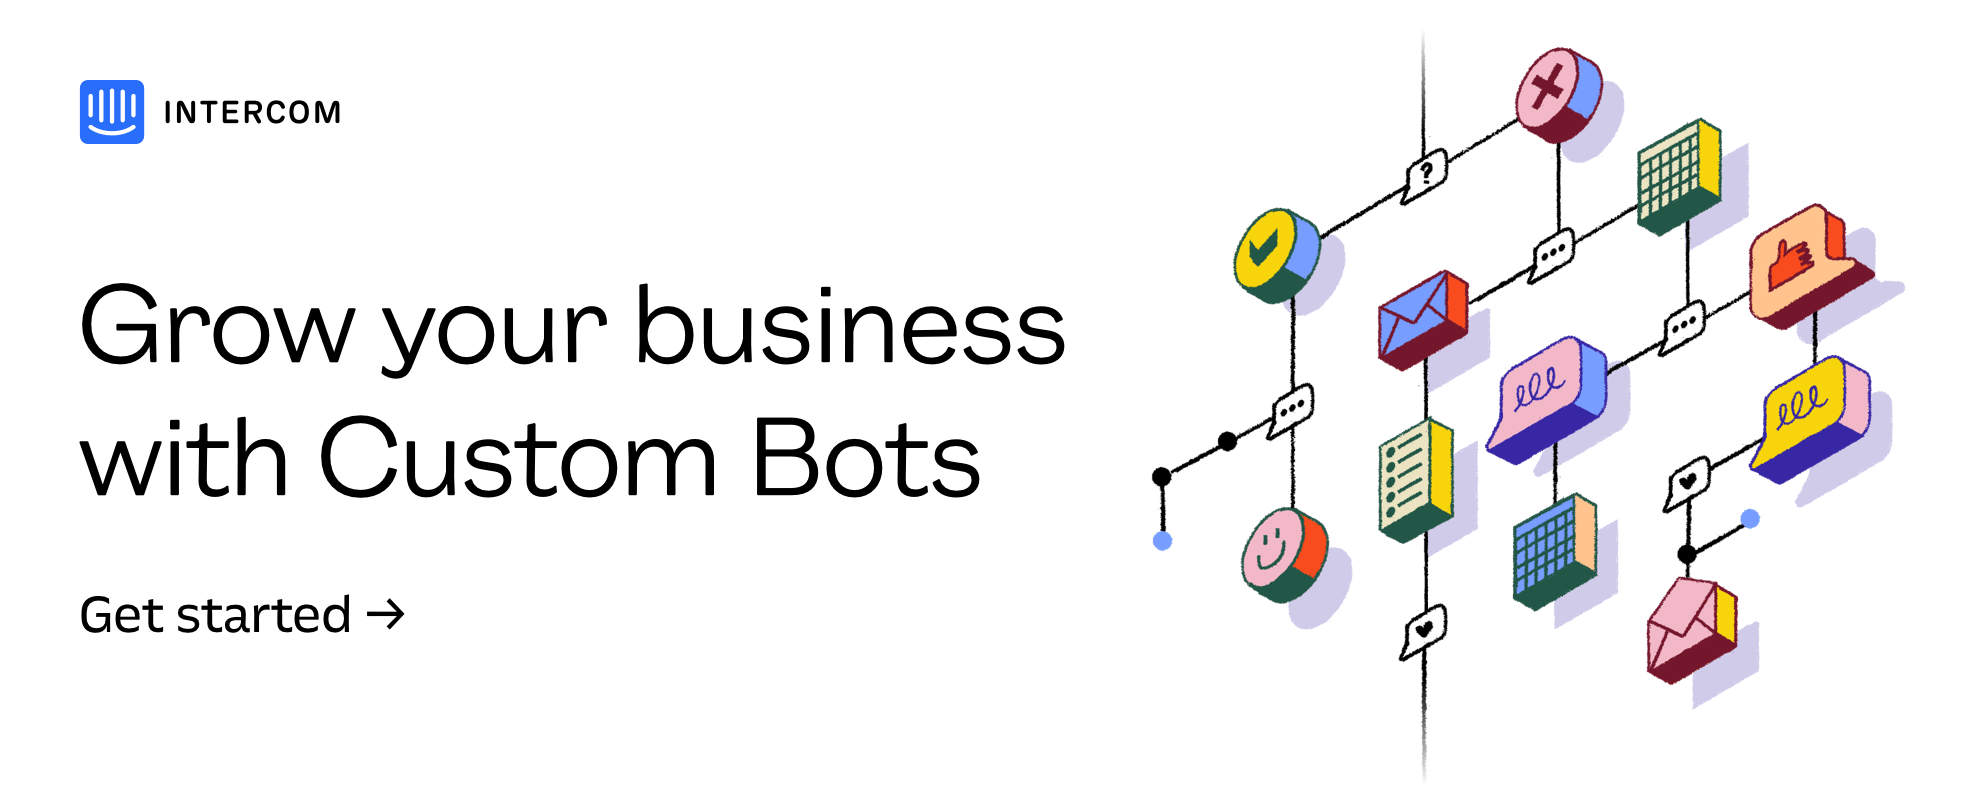 Get started with Custom Bots